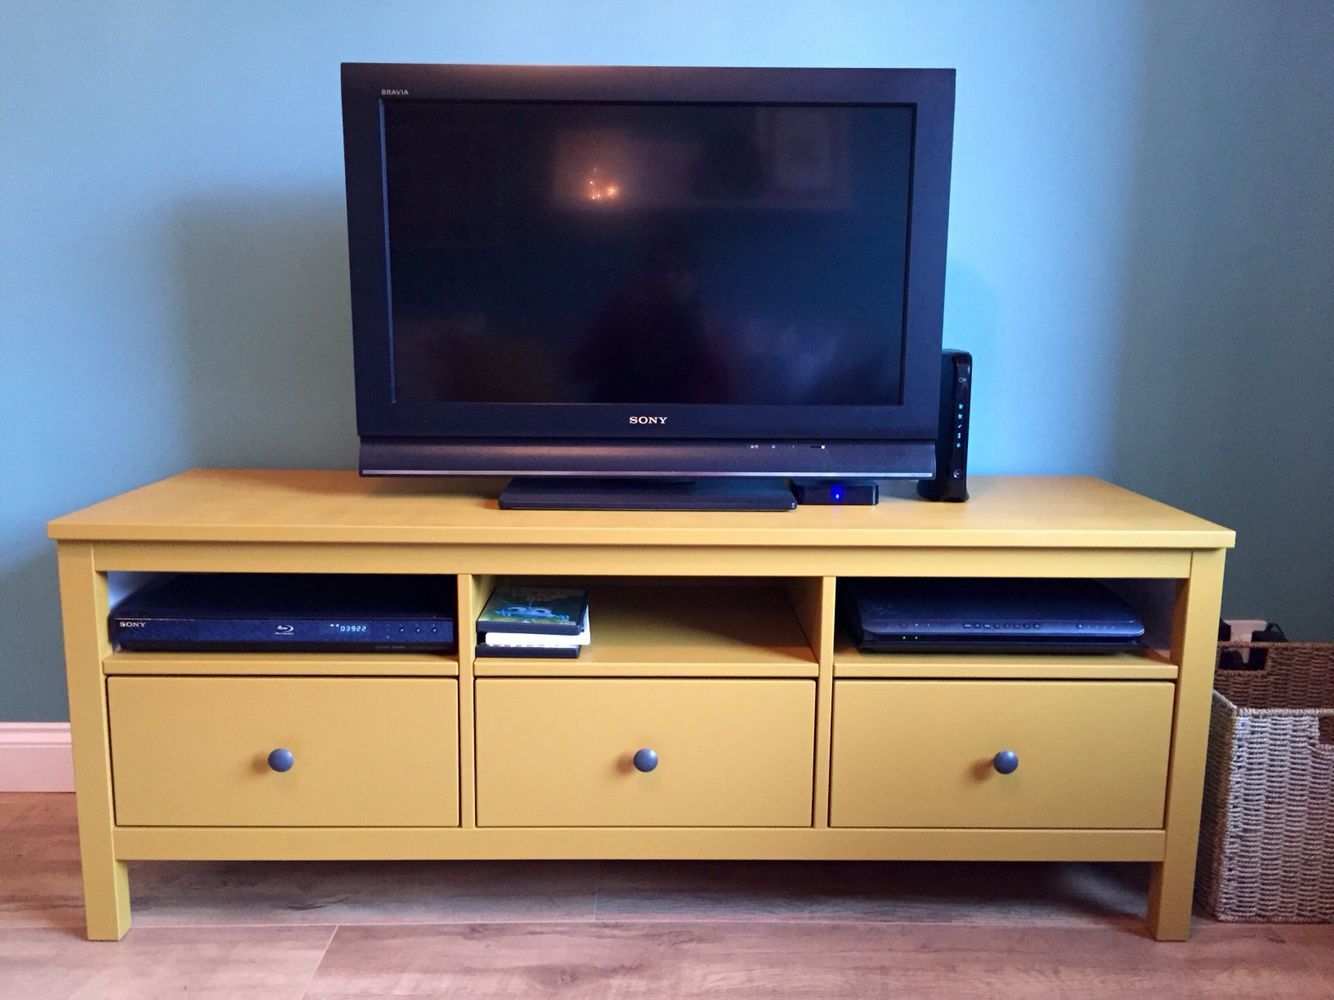 Hemnes Ikea Tv Stand Hack | Home Tv Stand, Ikea Hemnes Tv Inside Tv Console Table Ikea (View 3 of 15)